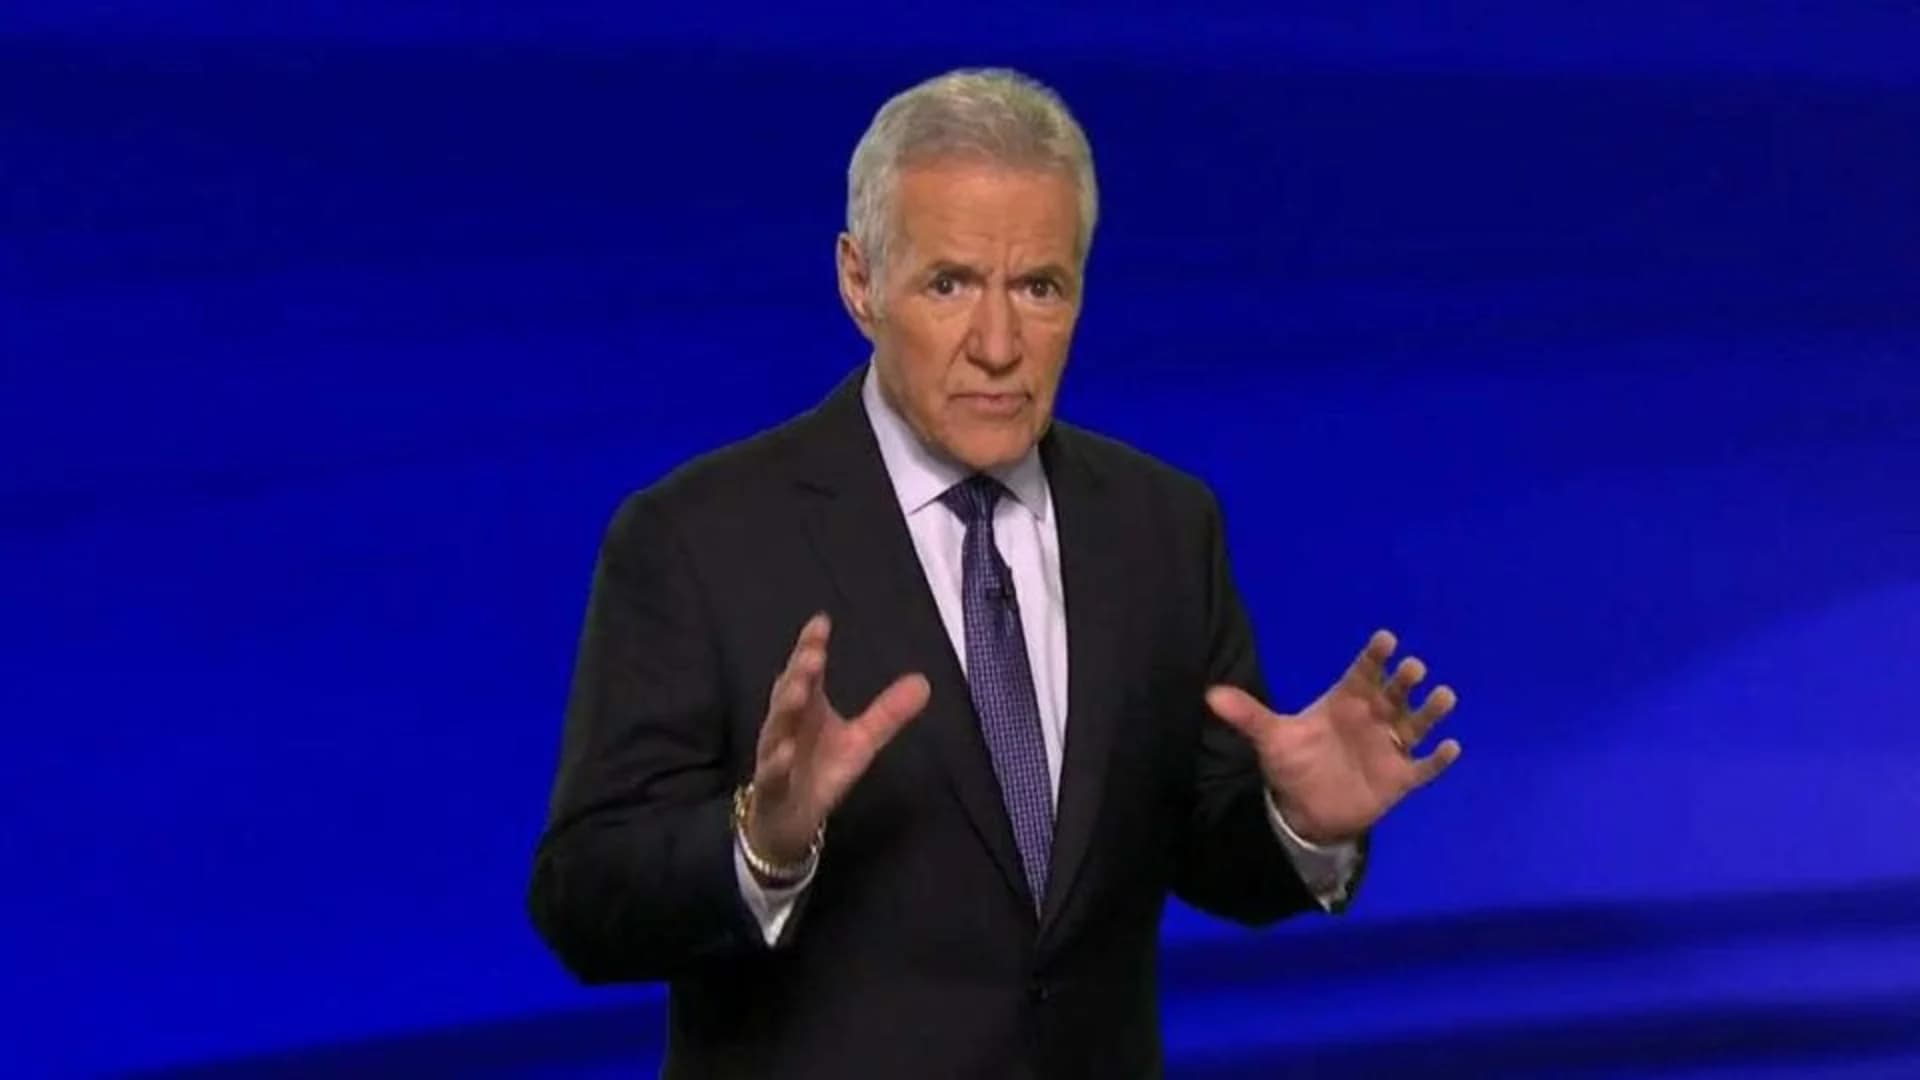 “Jeopardy!” host Alex Trebek thanks fans for well wishes